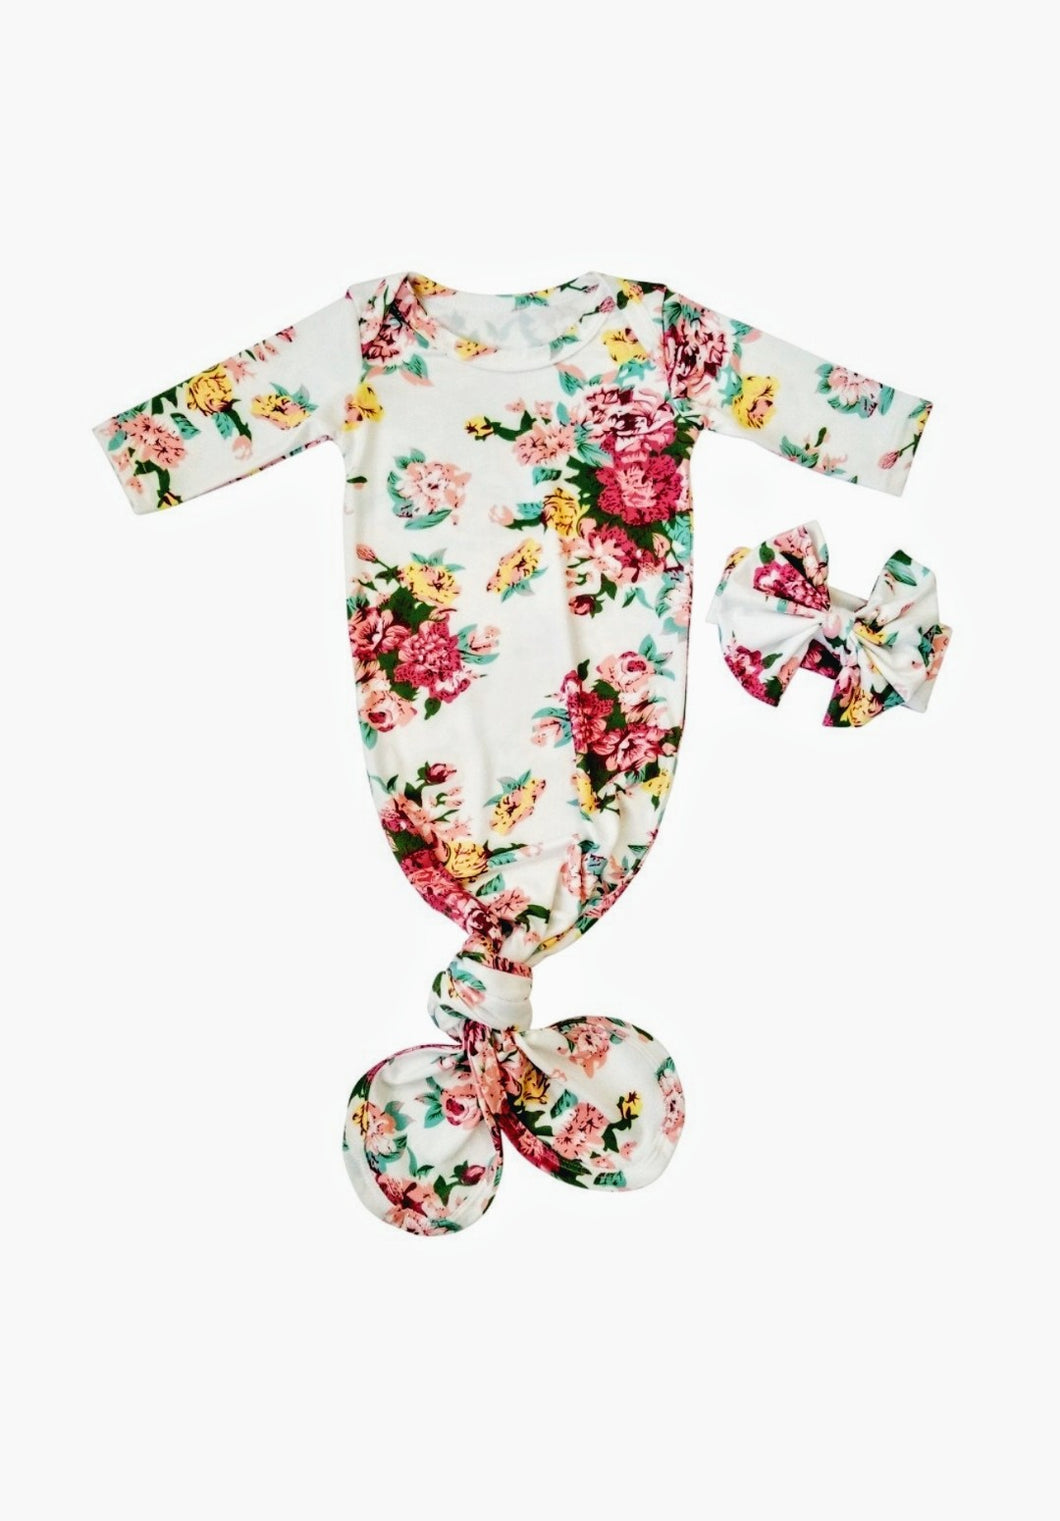 Scarlett Knotted Newborn Gown Coming Home Outfit Girl - Adassa Rose